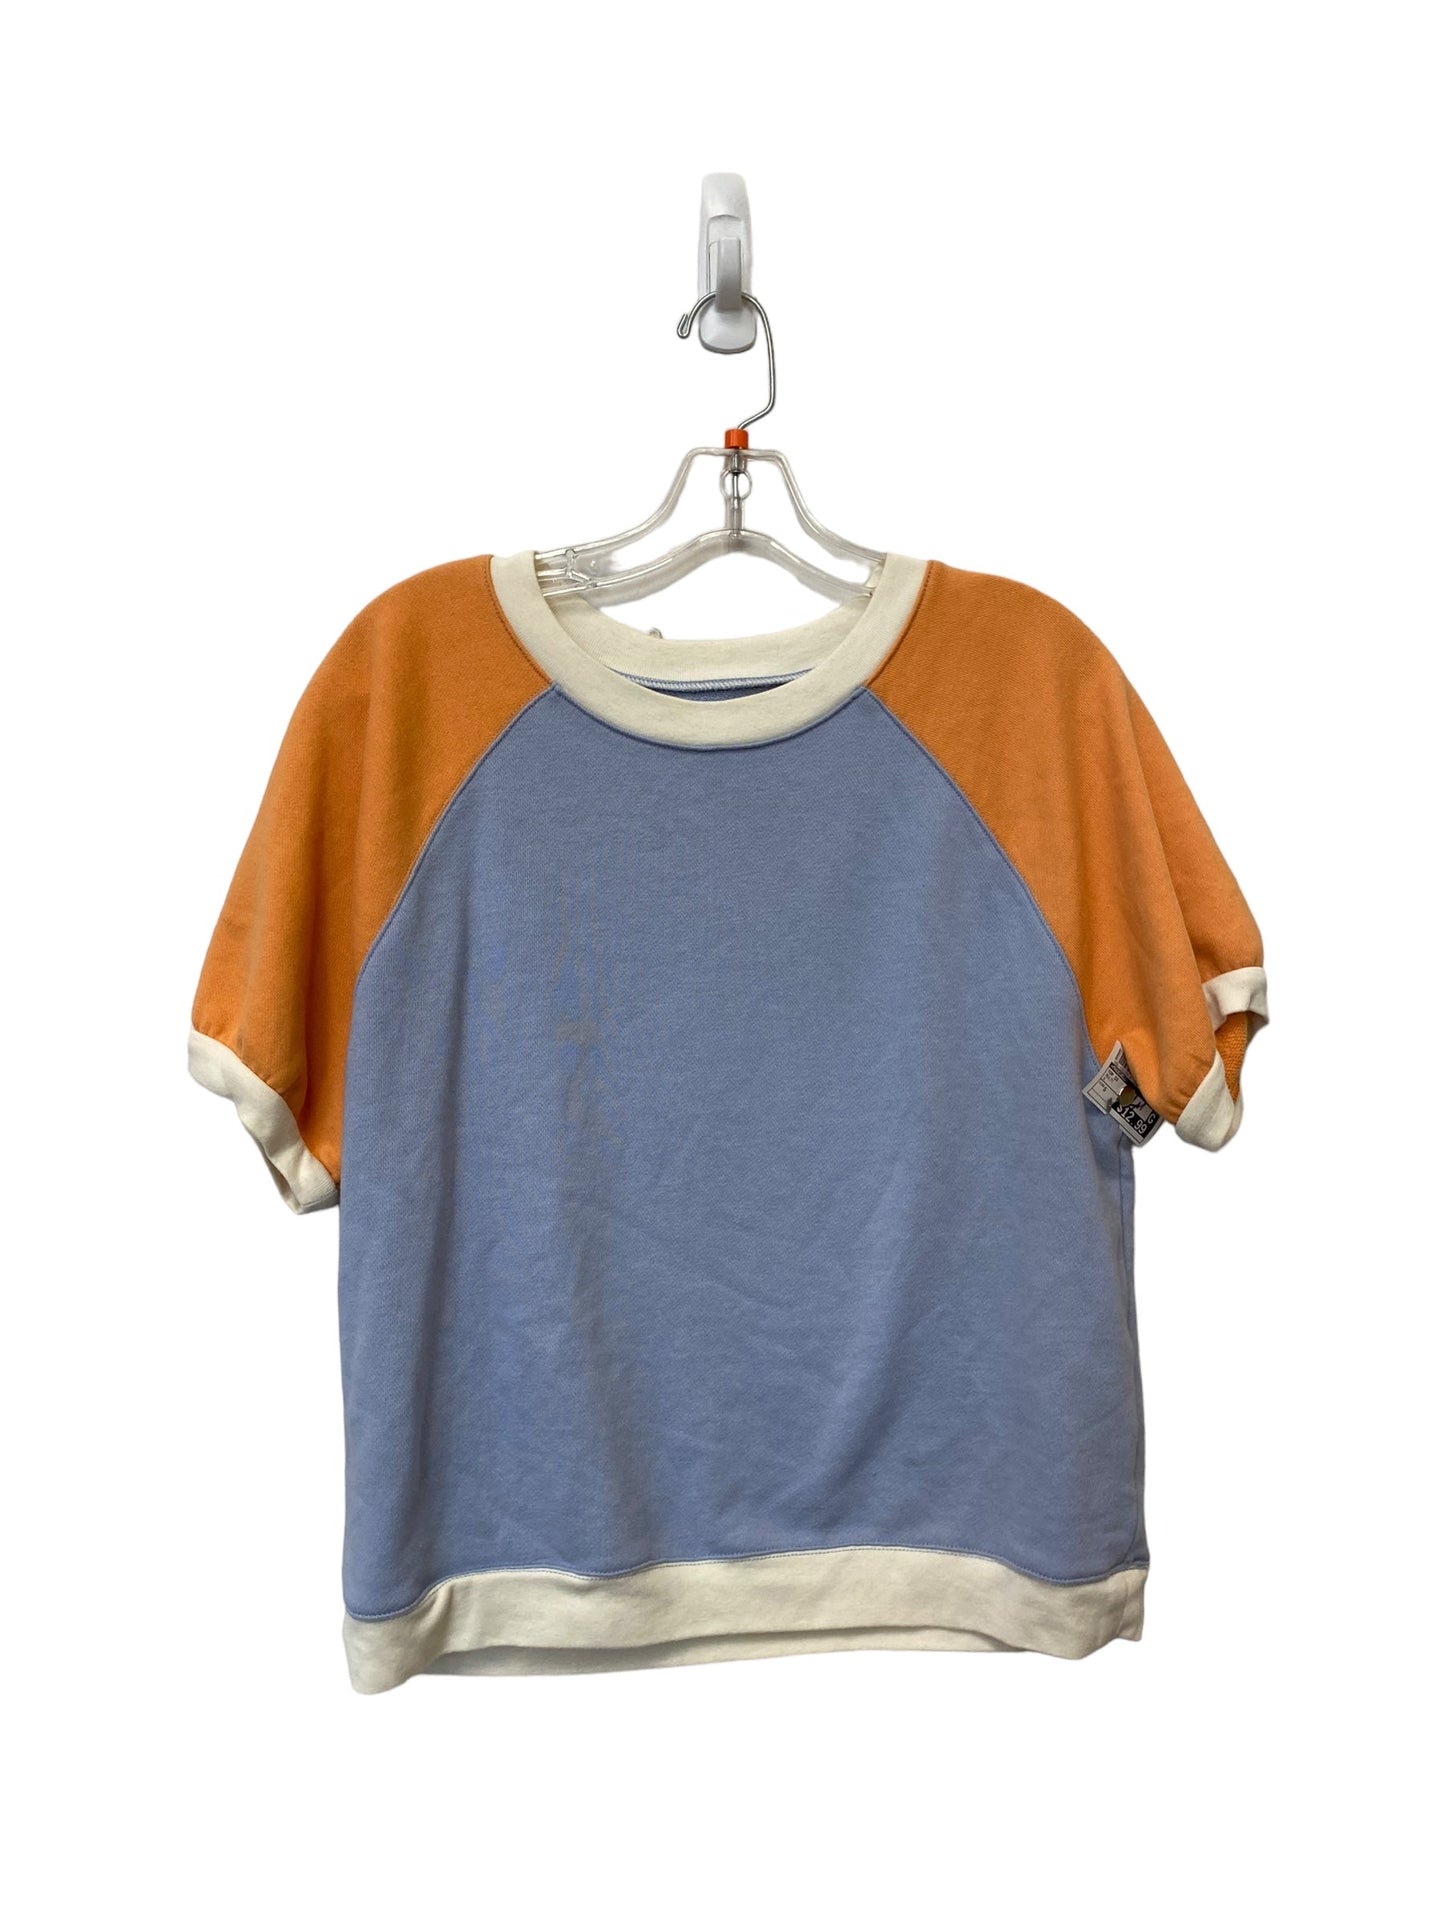 Multi-colored Top Short Sleeve Madewell, Size S